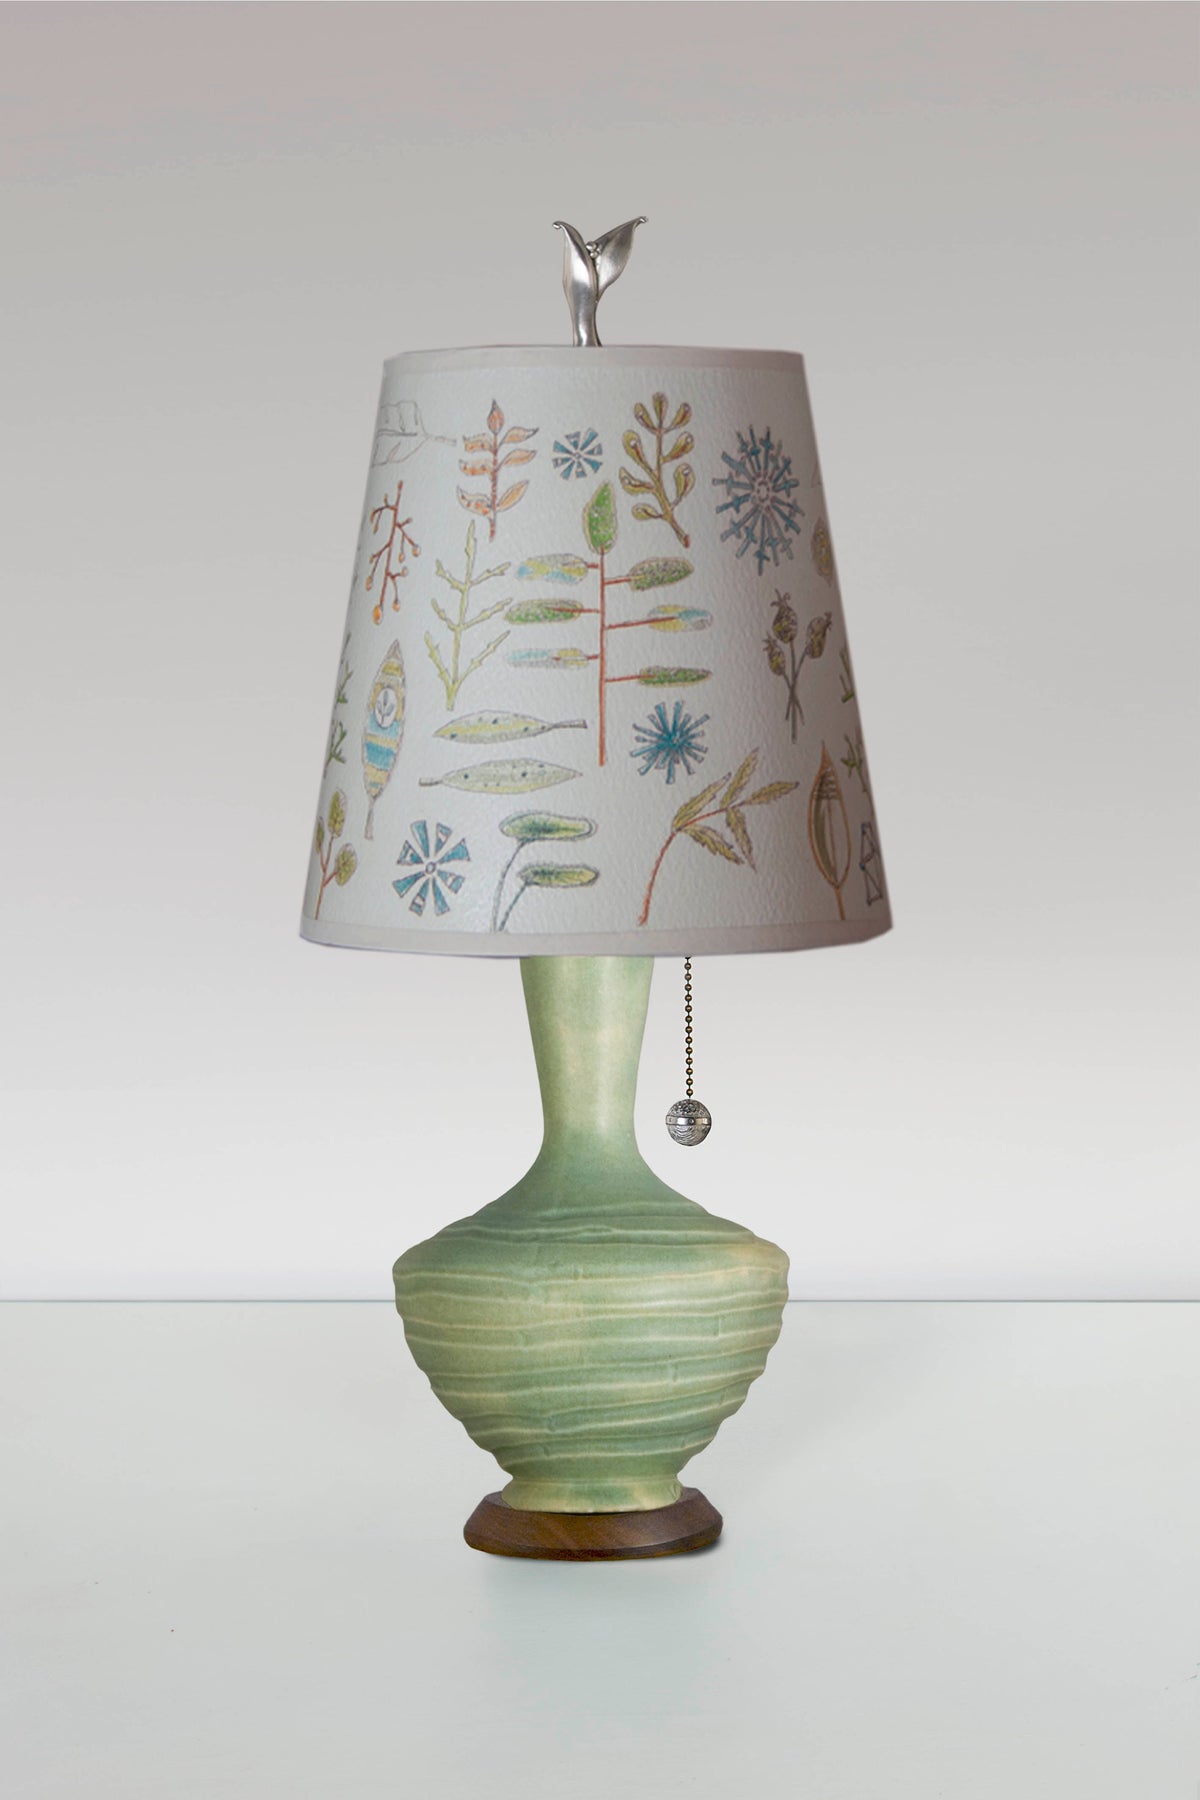 Janna Ugone &amp; Co Table Lamp Ceramic Table Lamp in Old Copper with Small Drum Shade in Field Chart